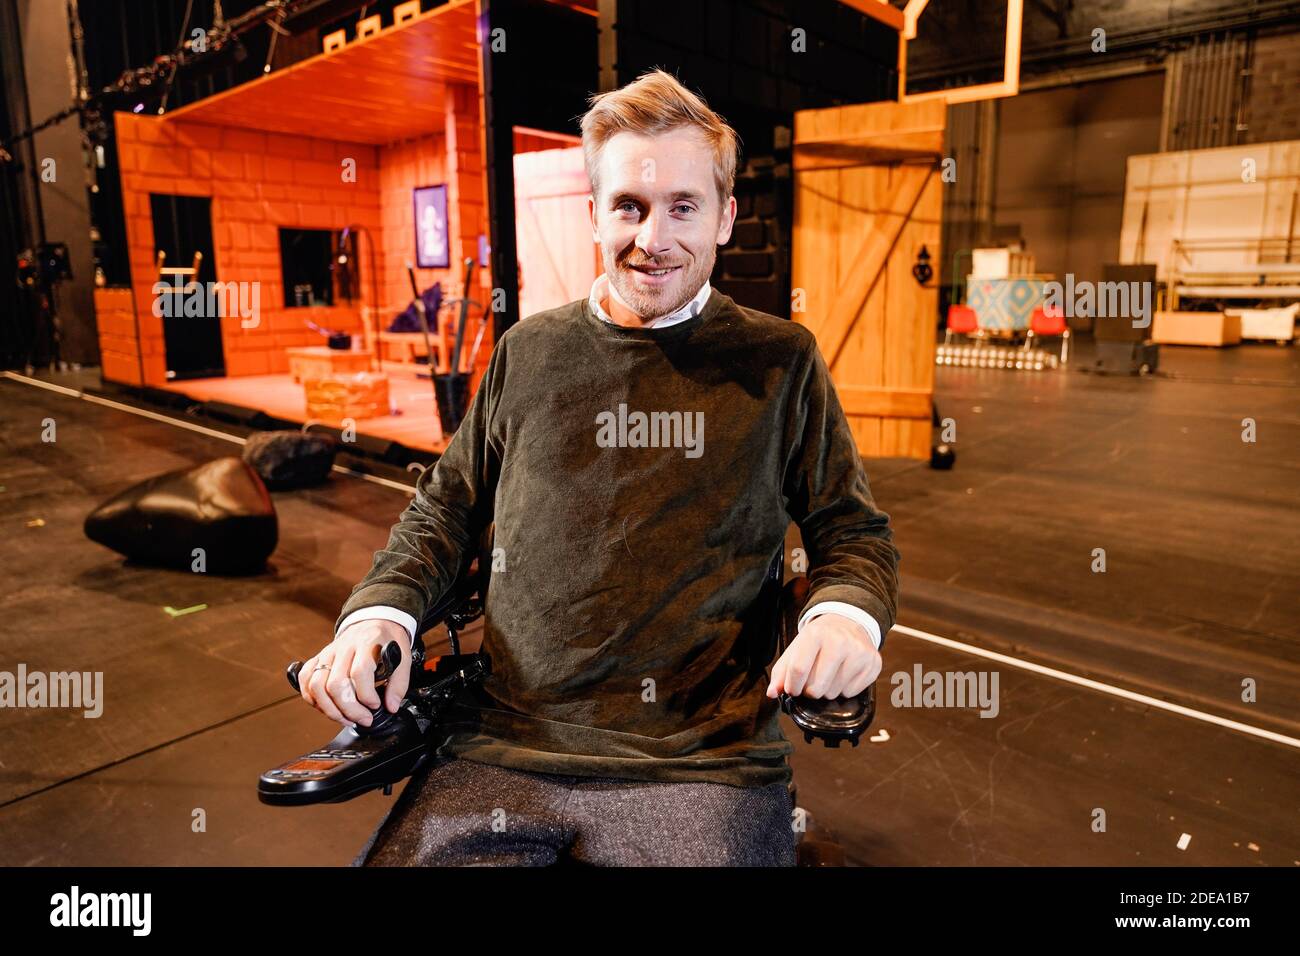 Mannheim, Germany. 18th Nov, 2020. Samuel Koch, a permanent member of the  ensemble at the Nationaltheater Mannheim, stands on a stage of the  Nationaltheater with his wheelchair. The desire to become "King